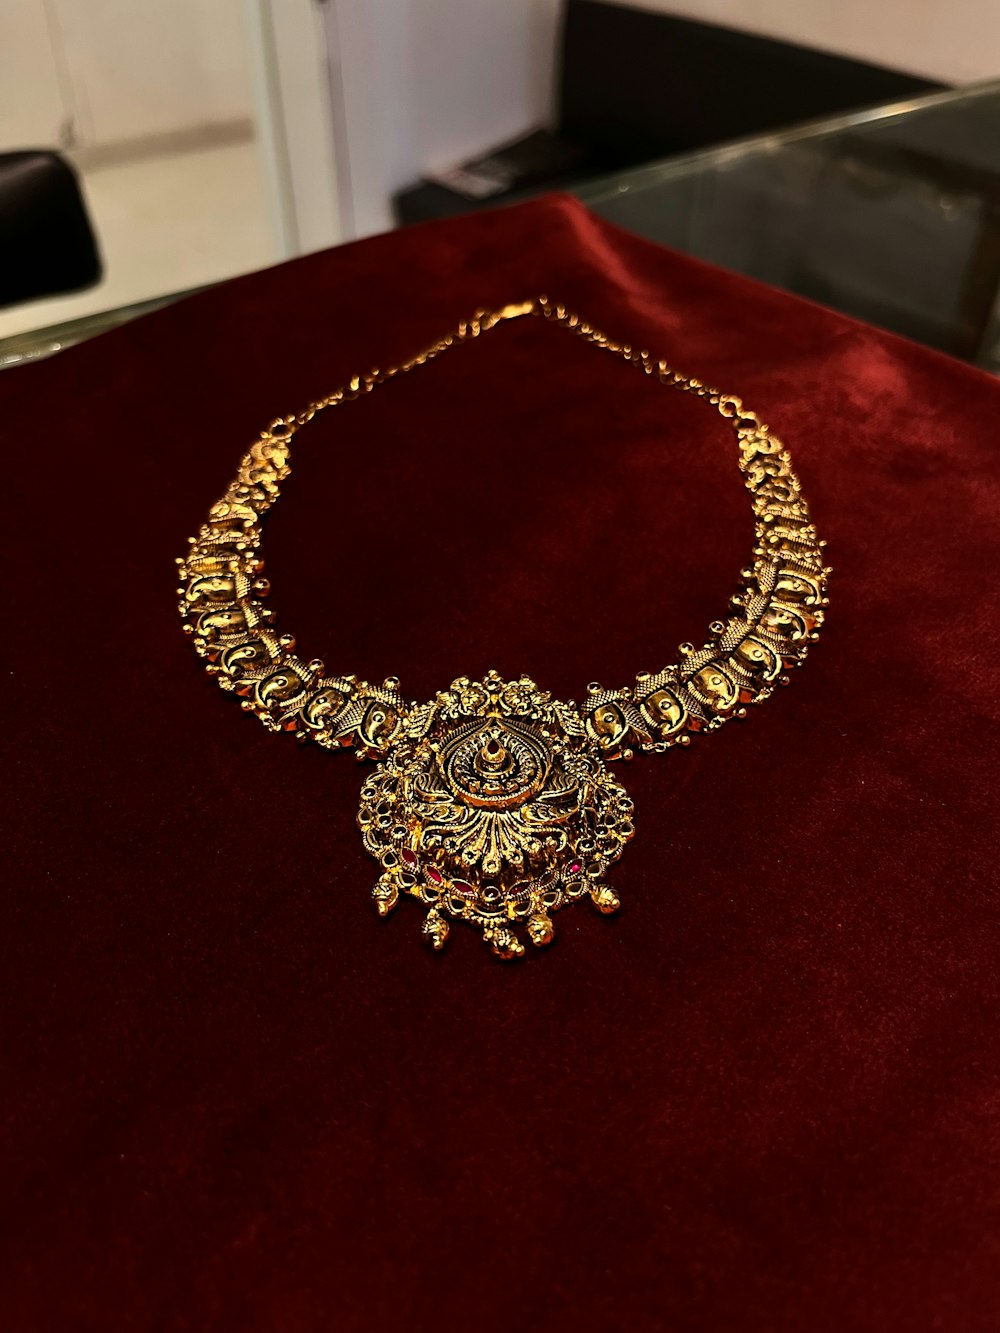 a gold necklace on a red velvet table